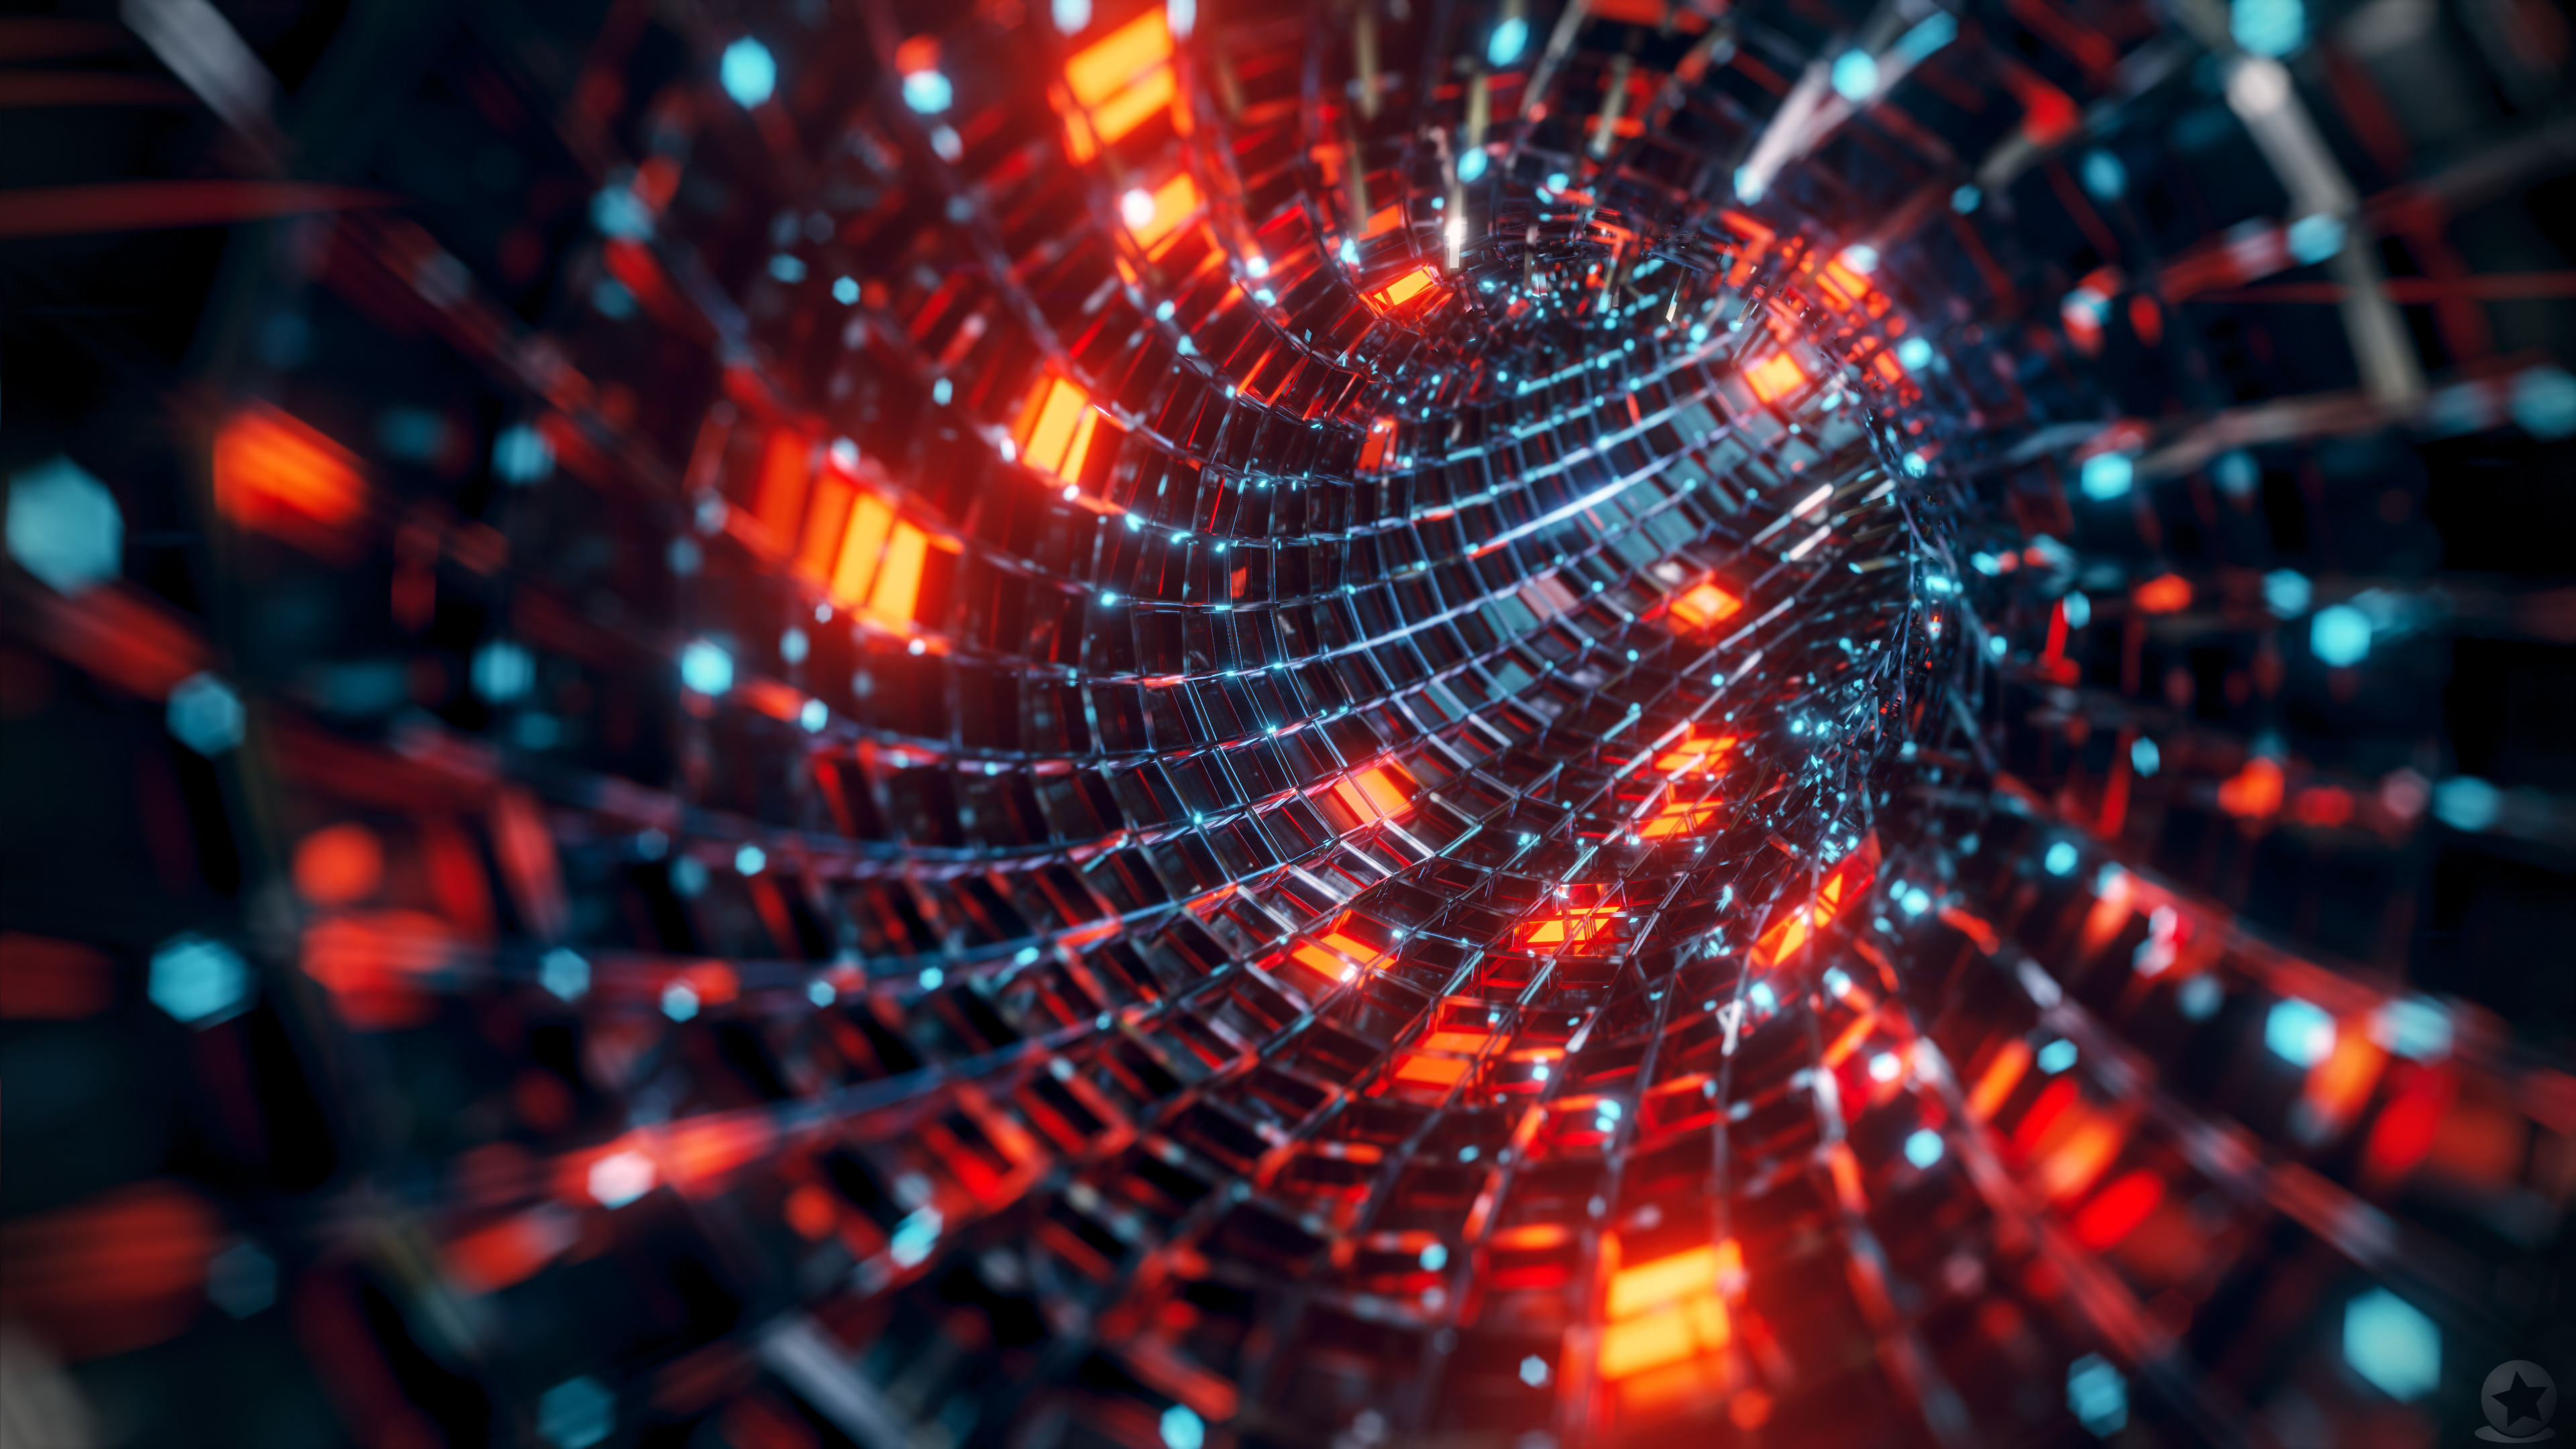 Tunnel Abstract Tech Curved Science Fiction Metal Grid Luminosity Tubes Blender 3840x2160